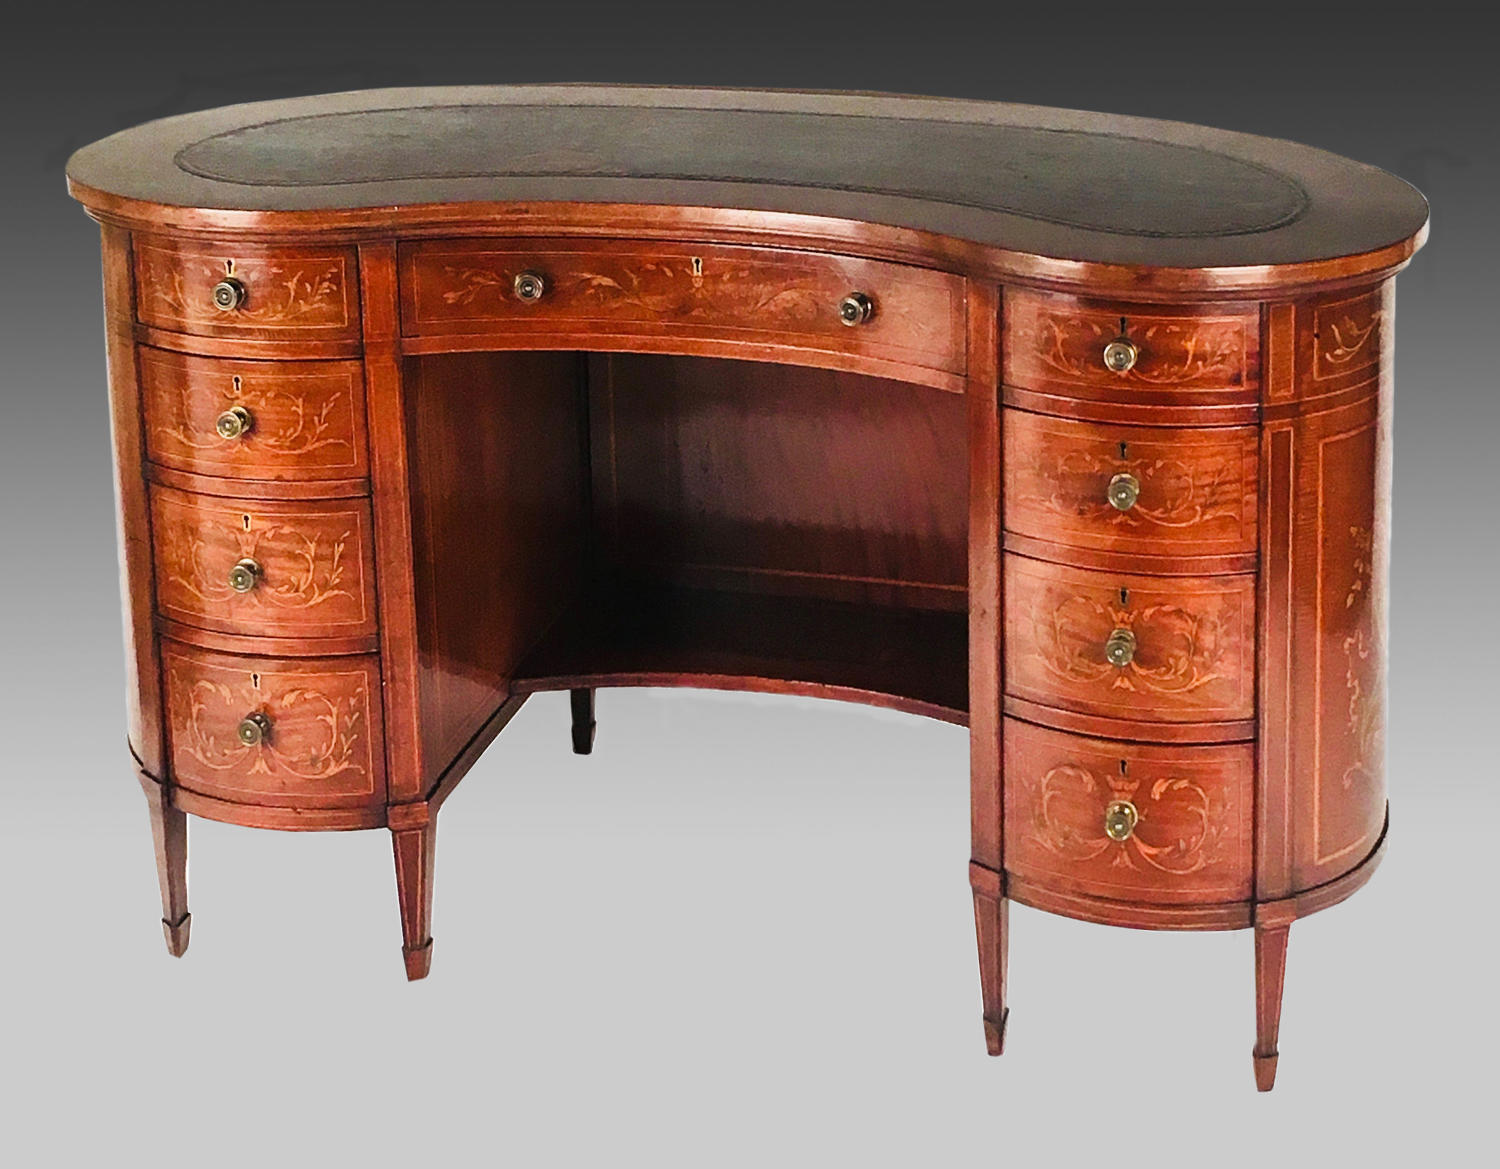 Marquetry inlaid writing desk